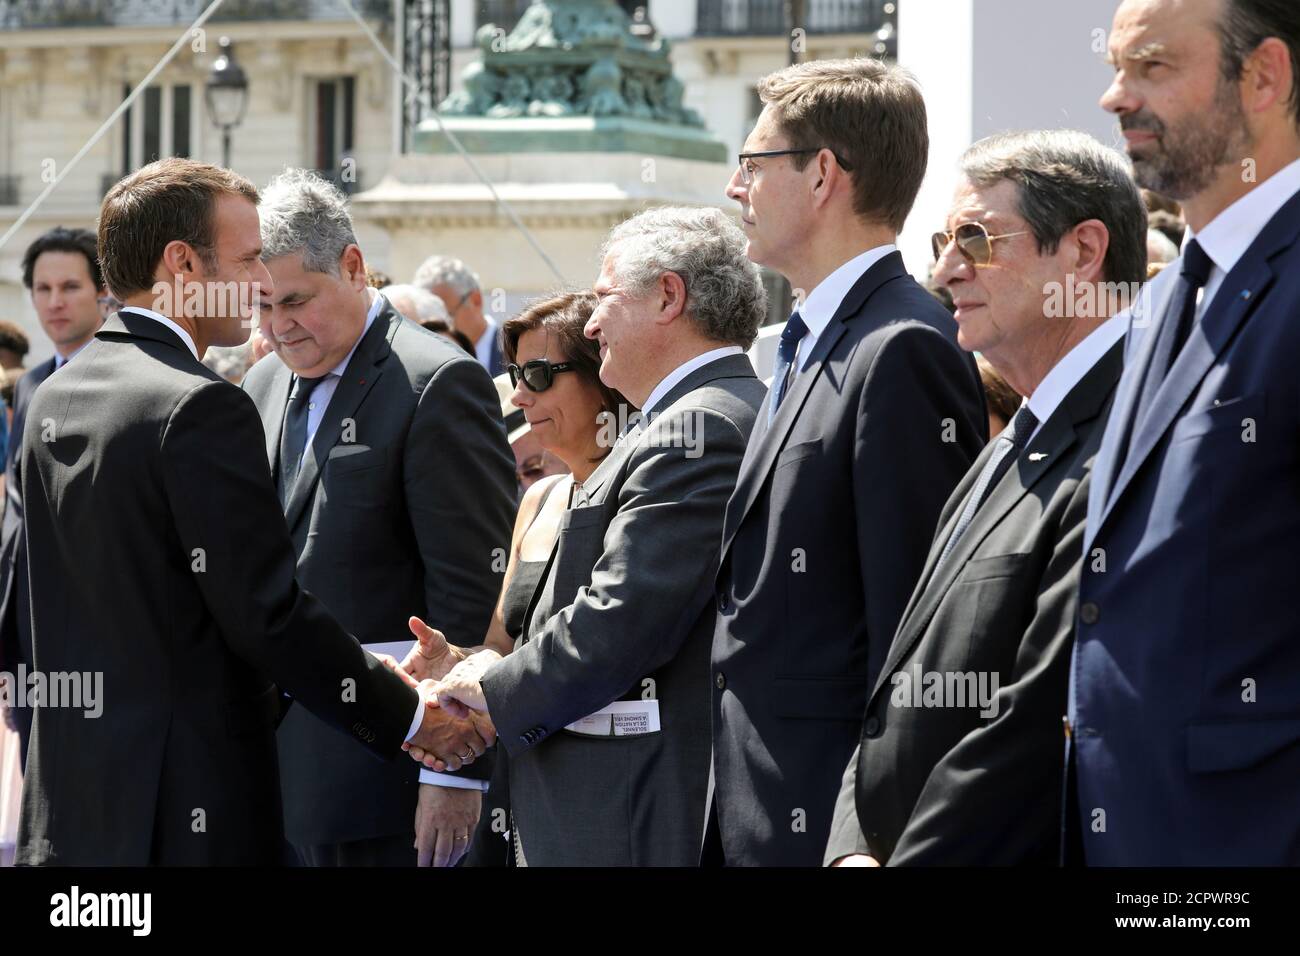 French President Emmanuel Macron speaks with Jean Veil and his wife  Dorothee Finot, who stands next to Pierre-Francois Veil (2ndL), sons of  late Auschwitz survivor and French health minister Simone Veil and